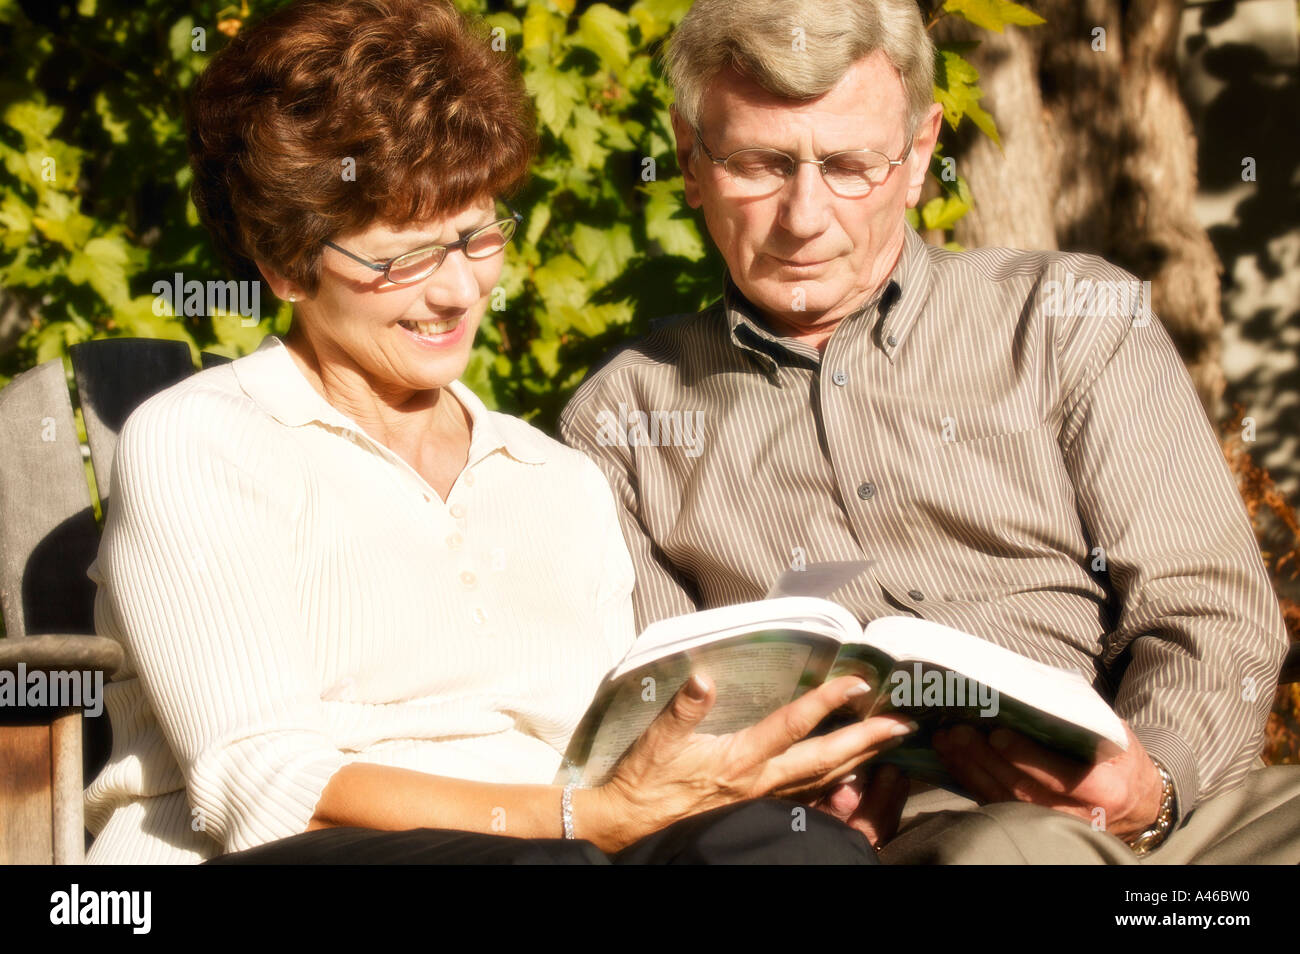 Couple read together Stock Photo